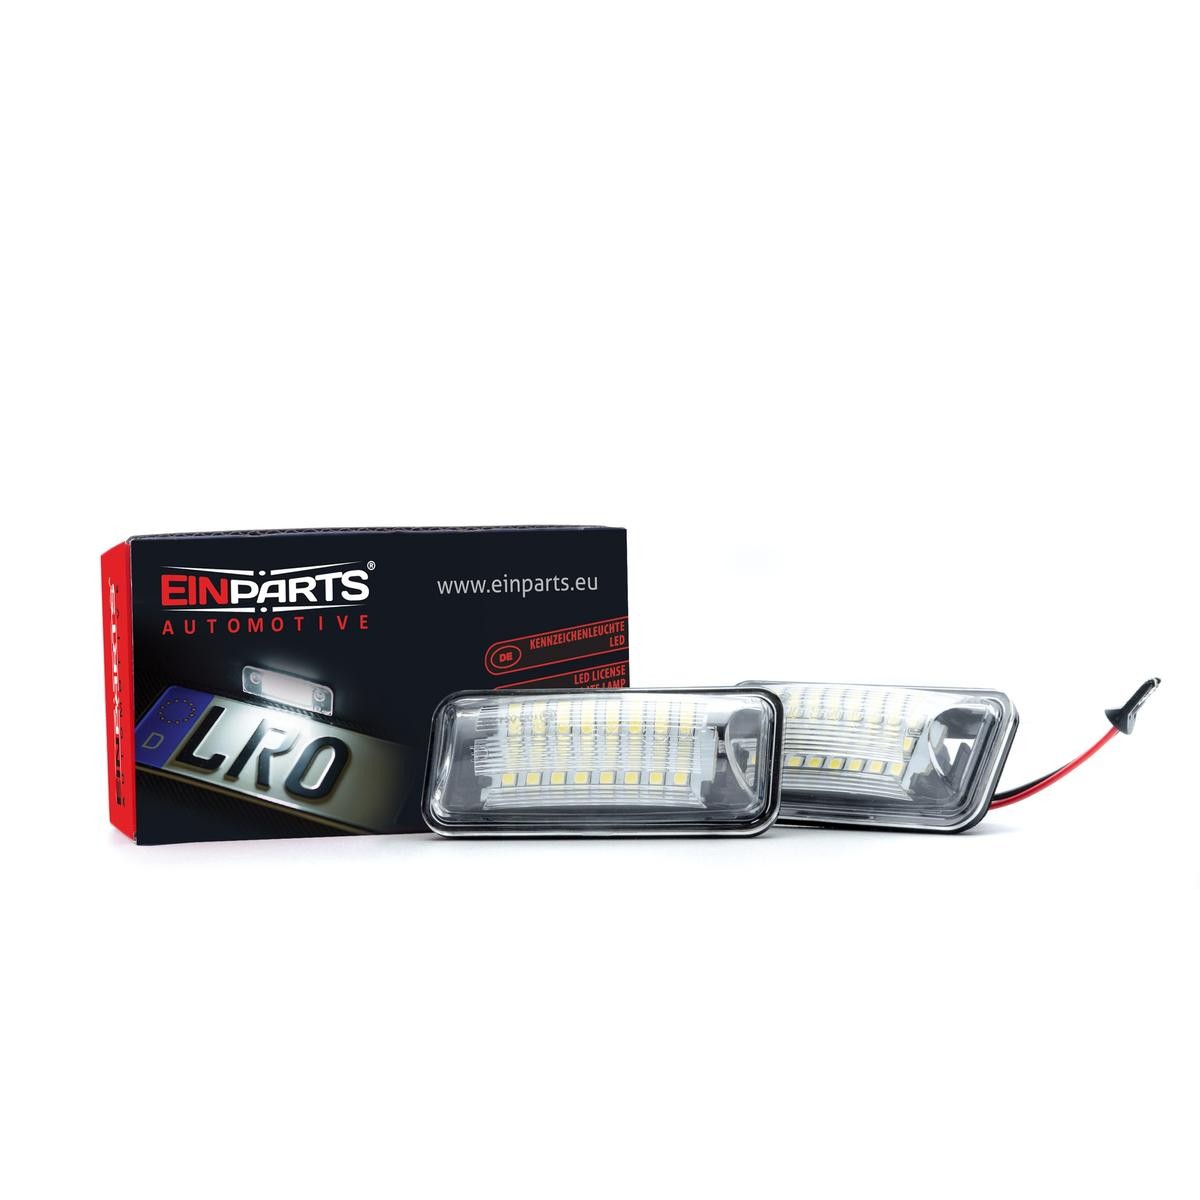 EINPARTS LED Suitable for CAN bus systems Licence Plate Light EP40 buy